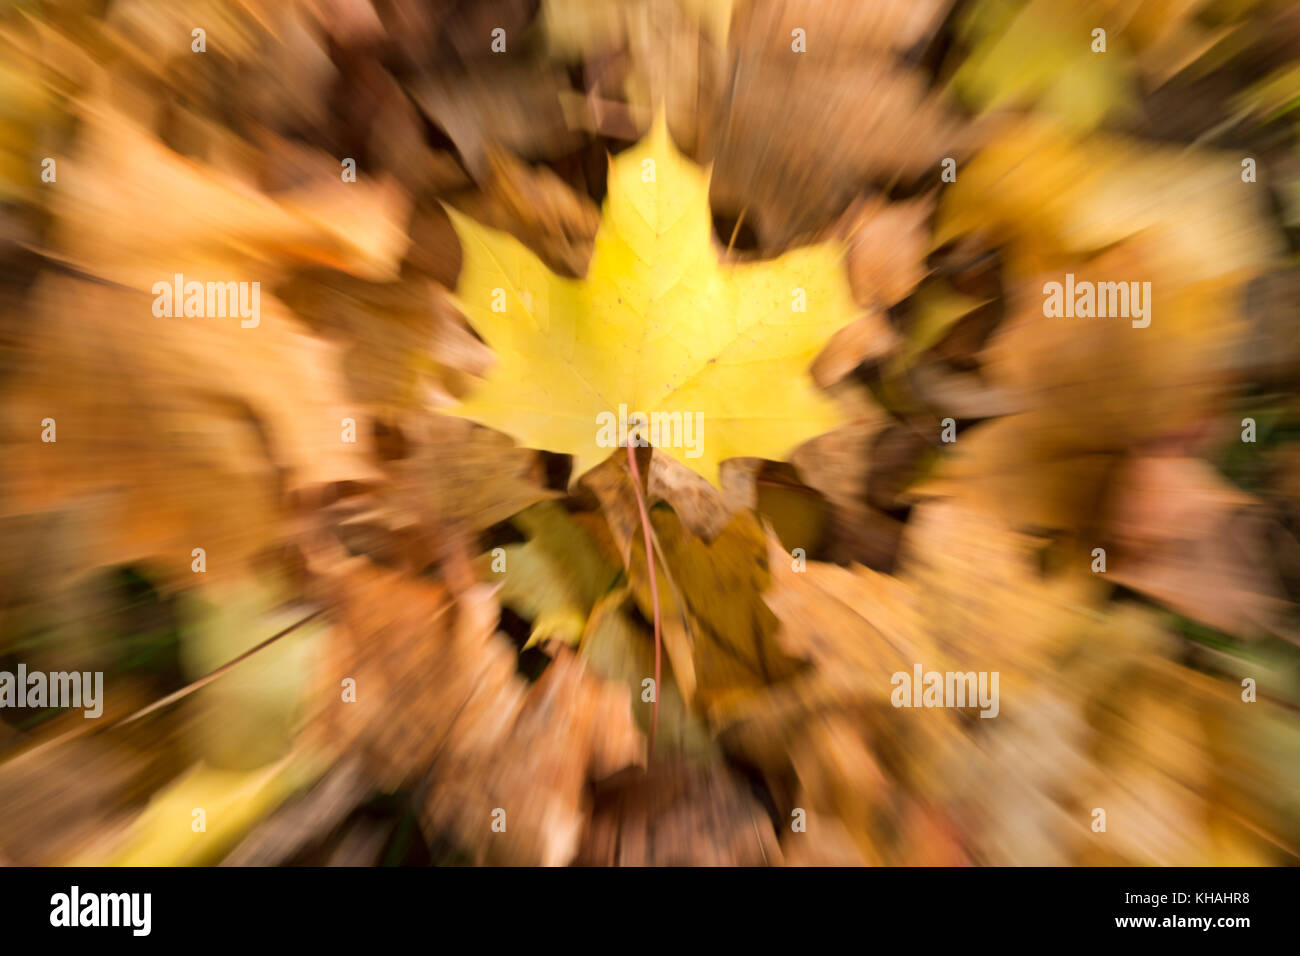 An artistically zoomed image of colourful autumn leaves Stock Photo